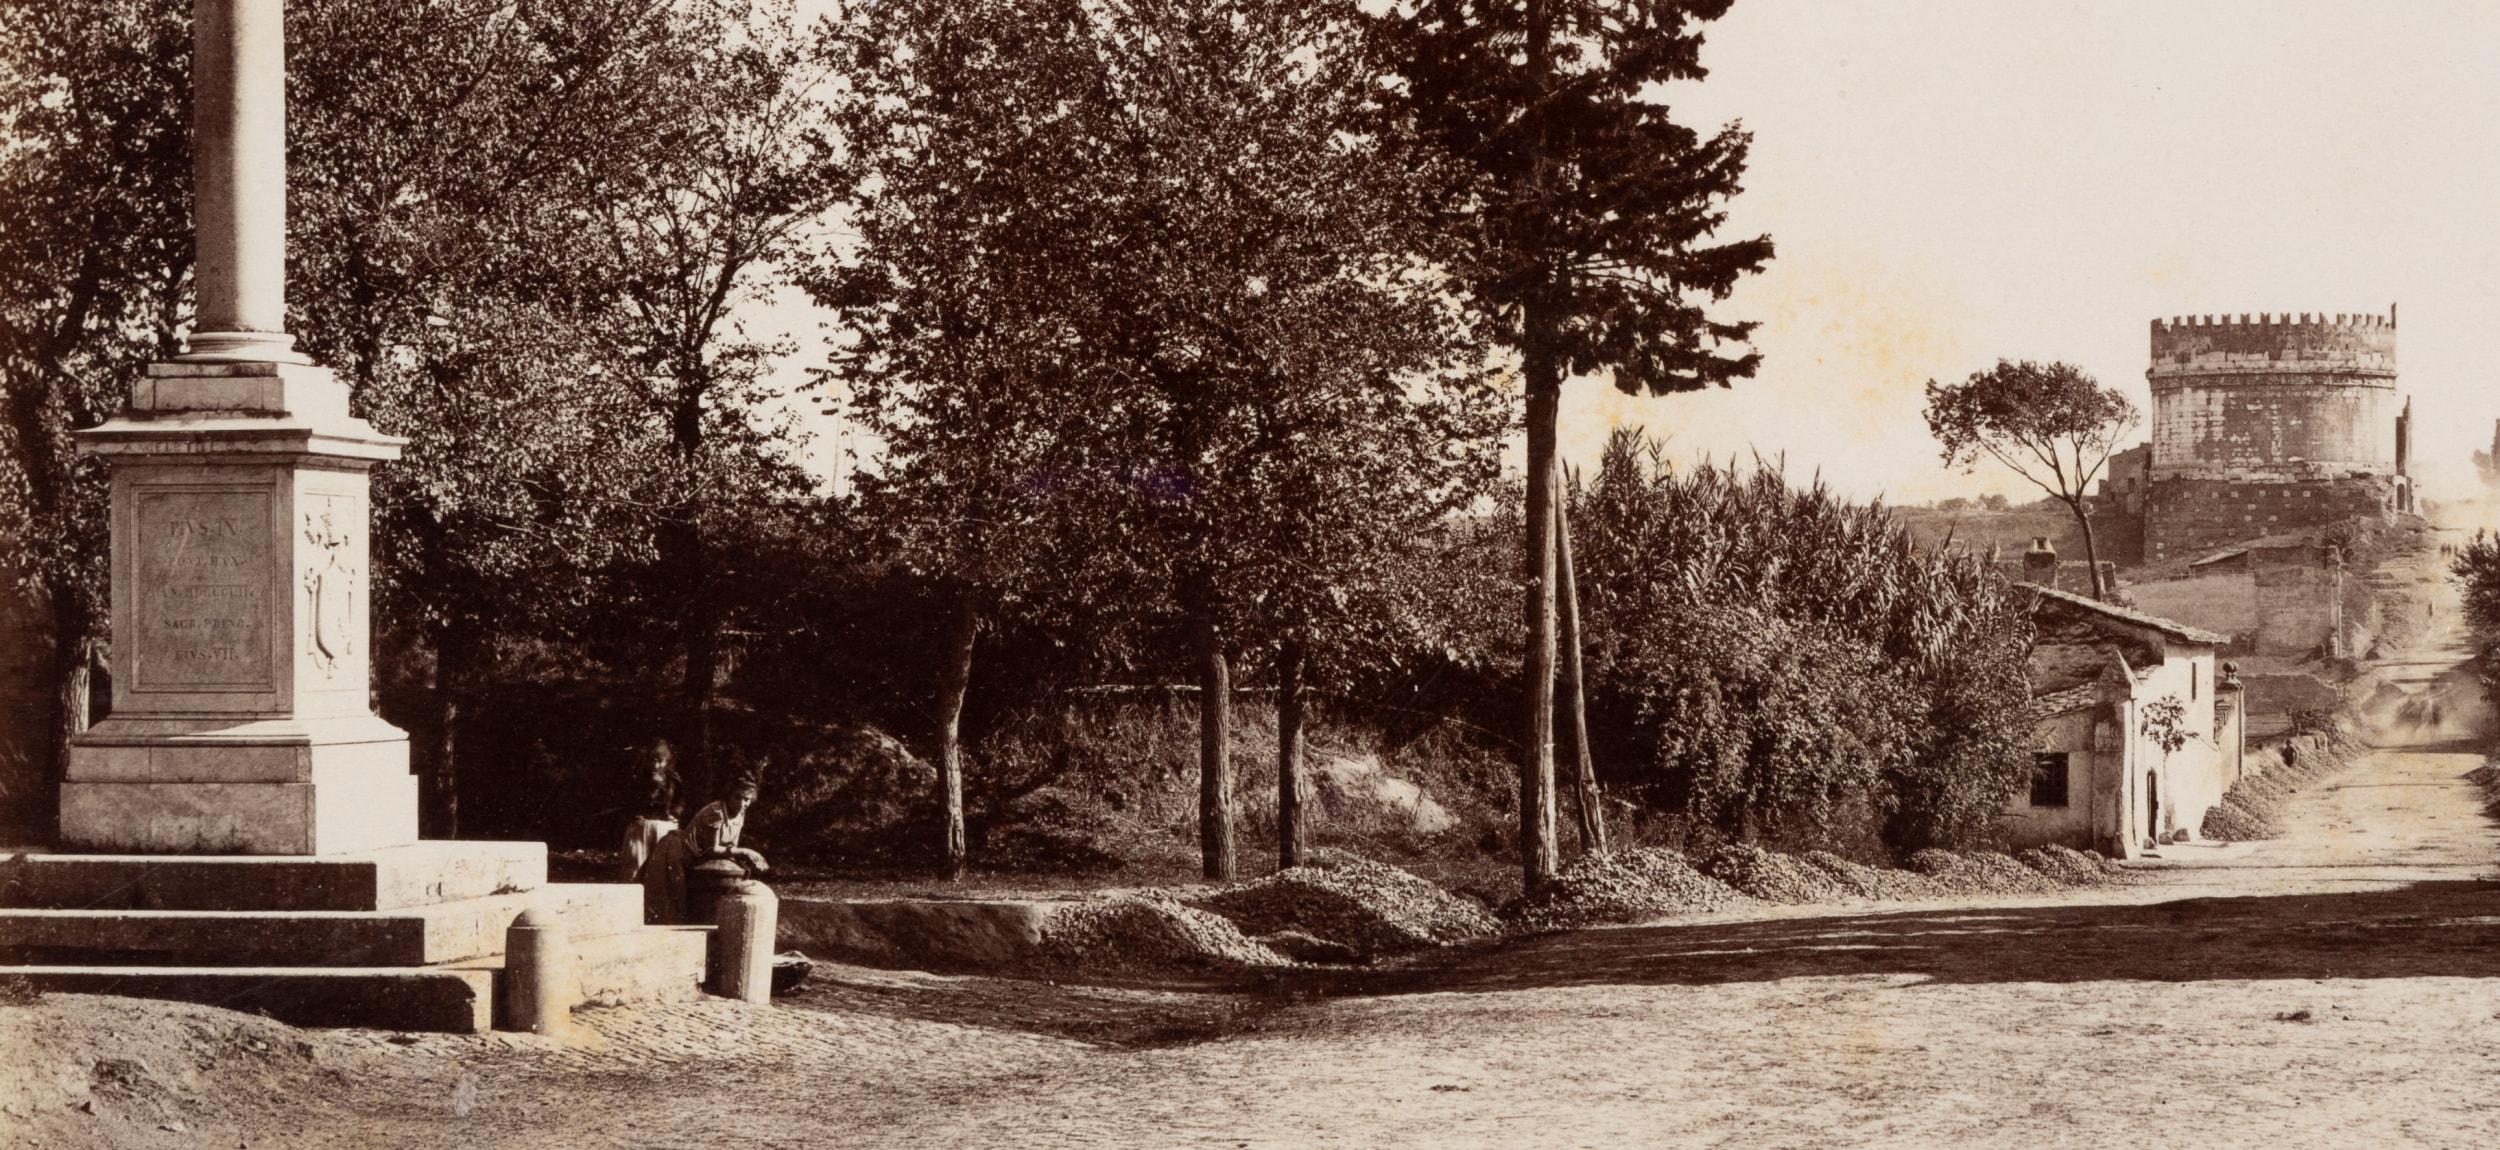 Fratelli Alinari (19th century) Circle: View of the funerary monument of Caecilia Metella from the Via Appia Near Rome, c. 1880, albumen paper print

Technique: albumen paper print

Inscription: At the lower part inscribed in the printing plate: